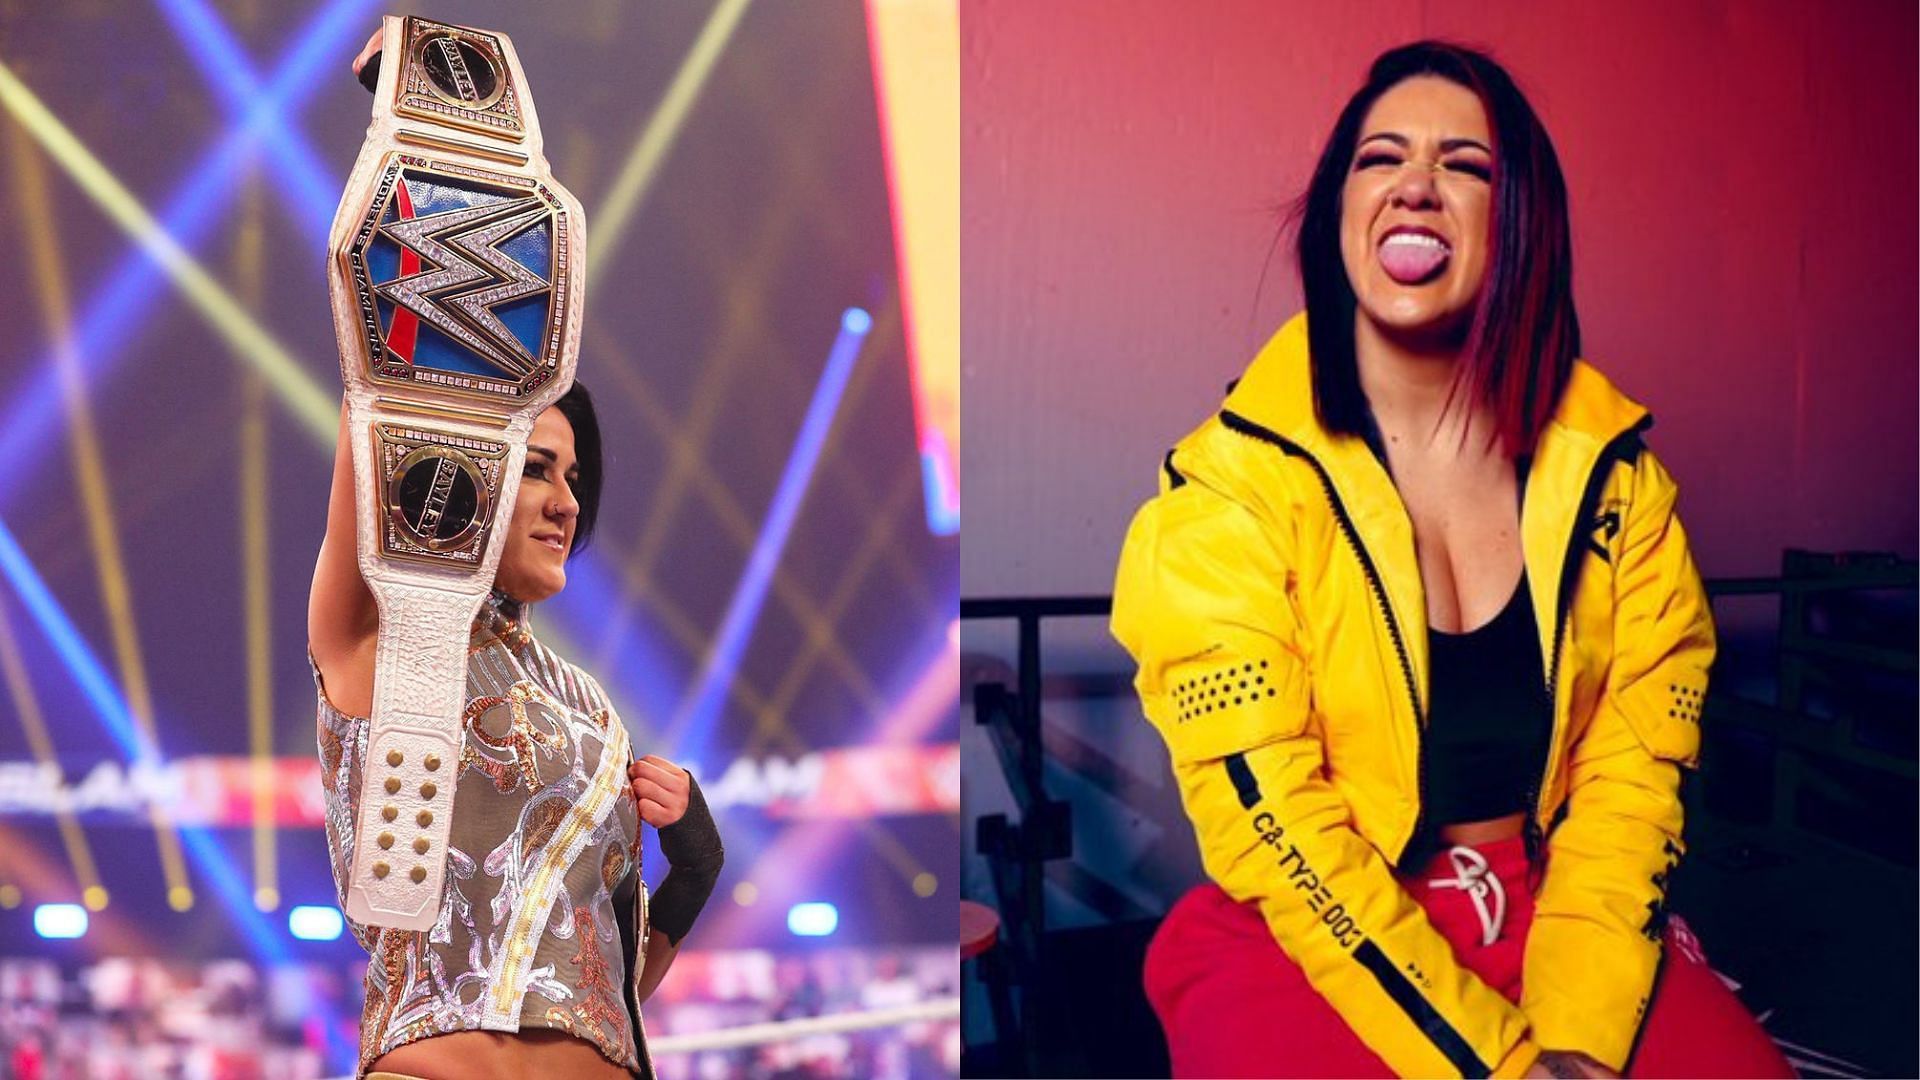 Bayley is currently feuding with Shotzi on WWE programming